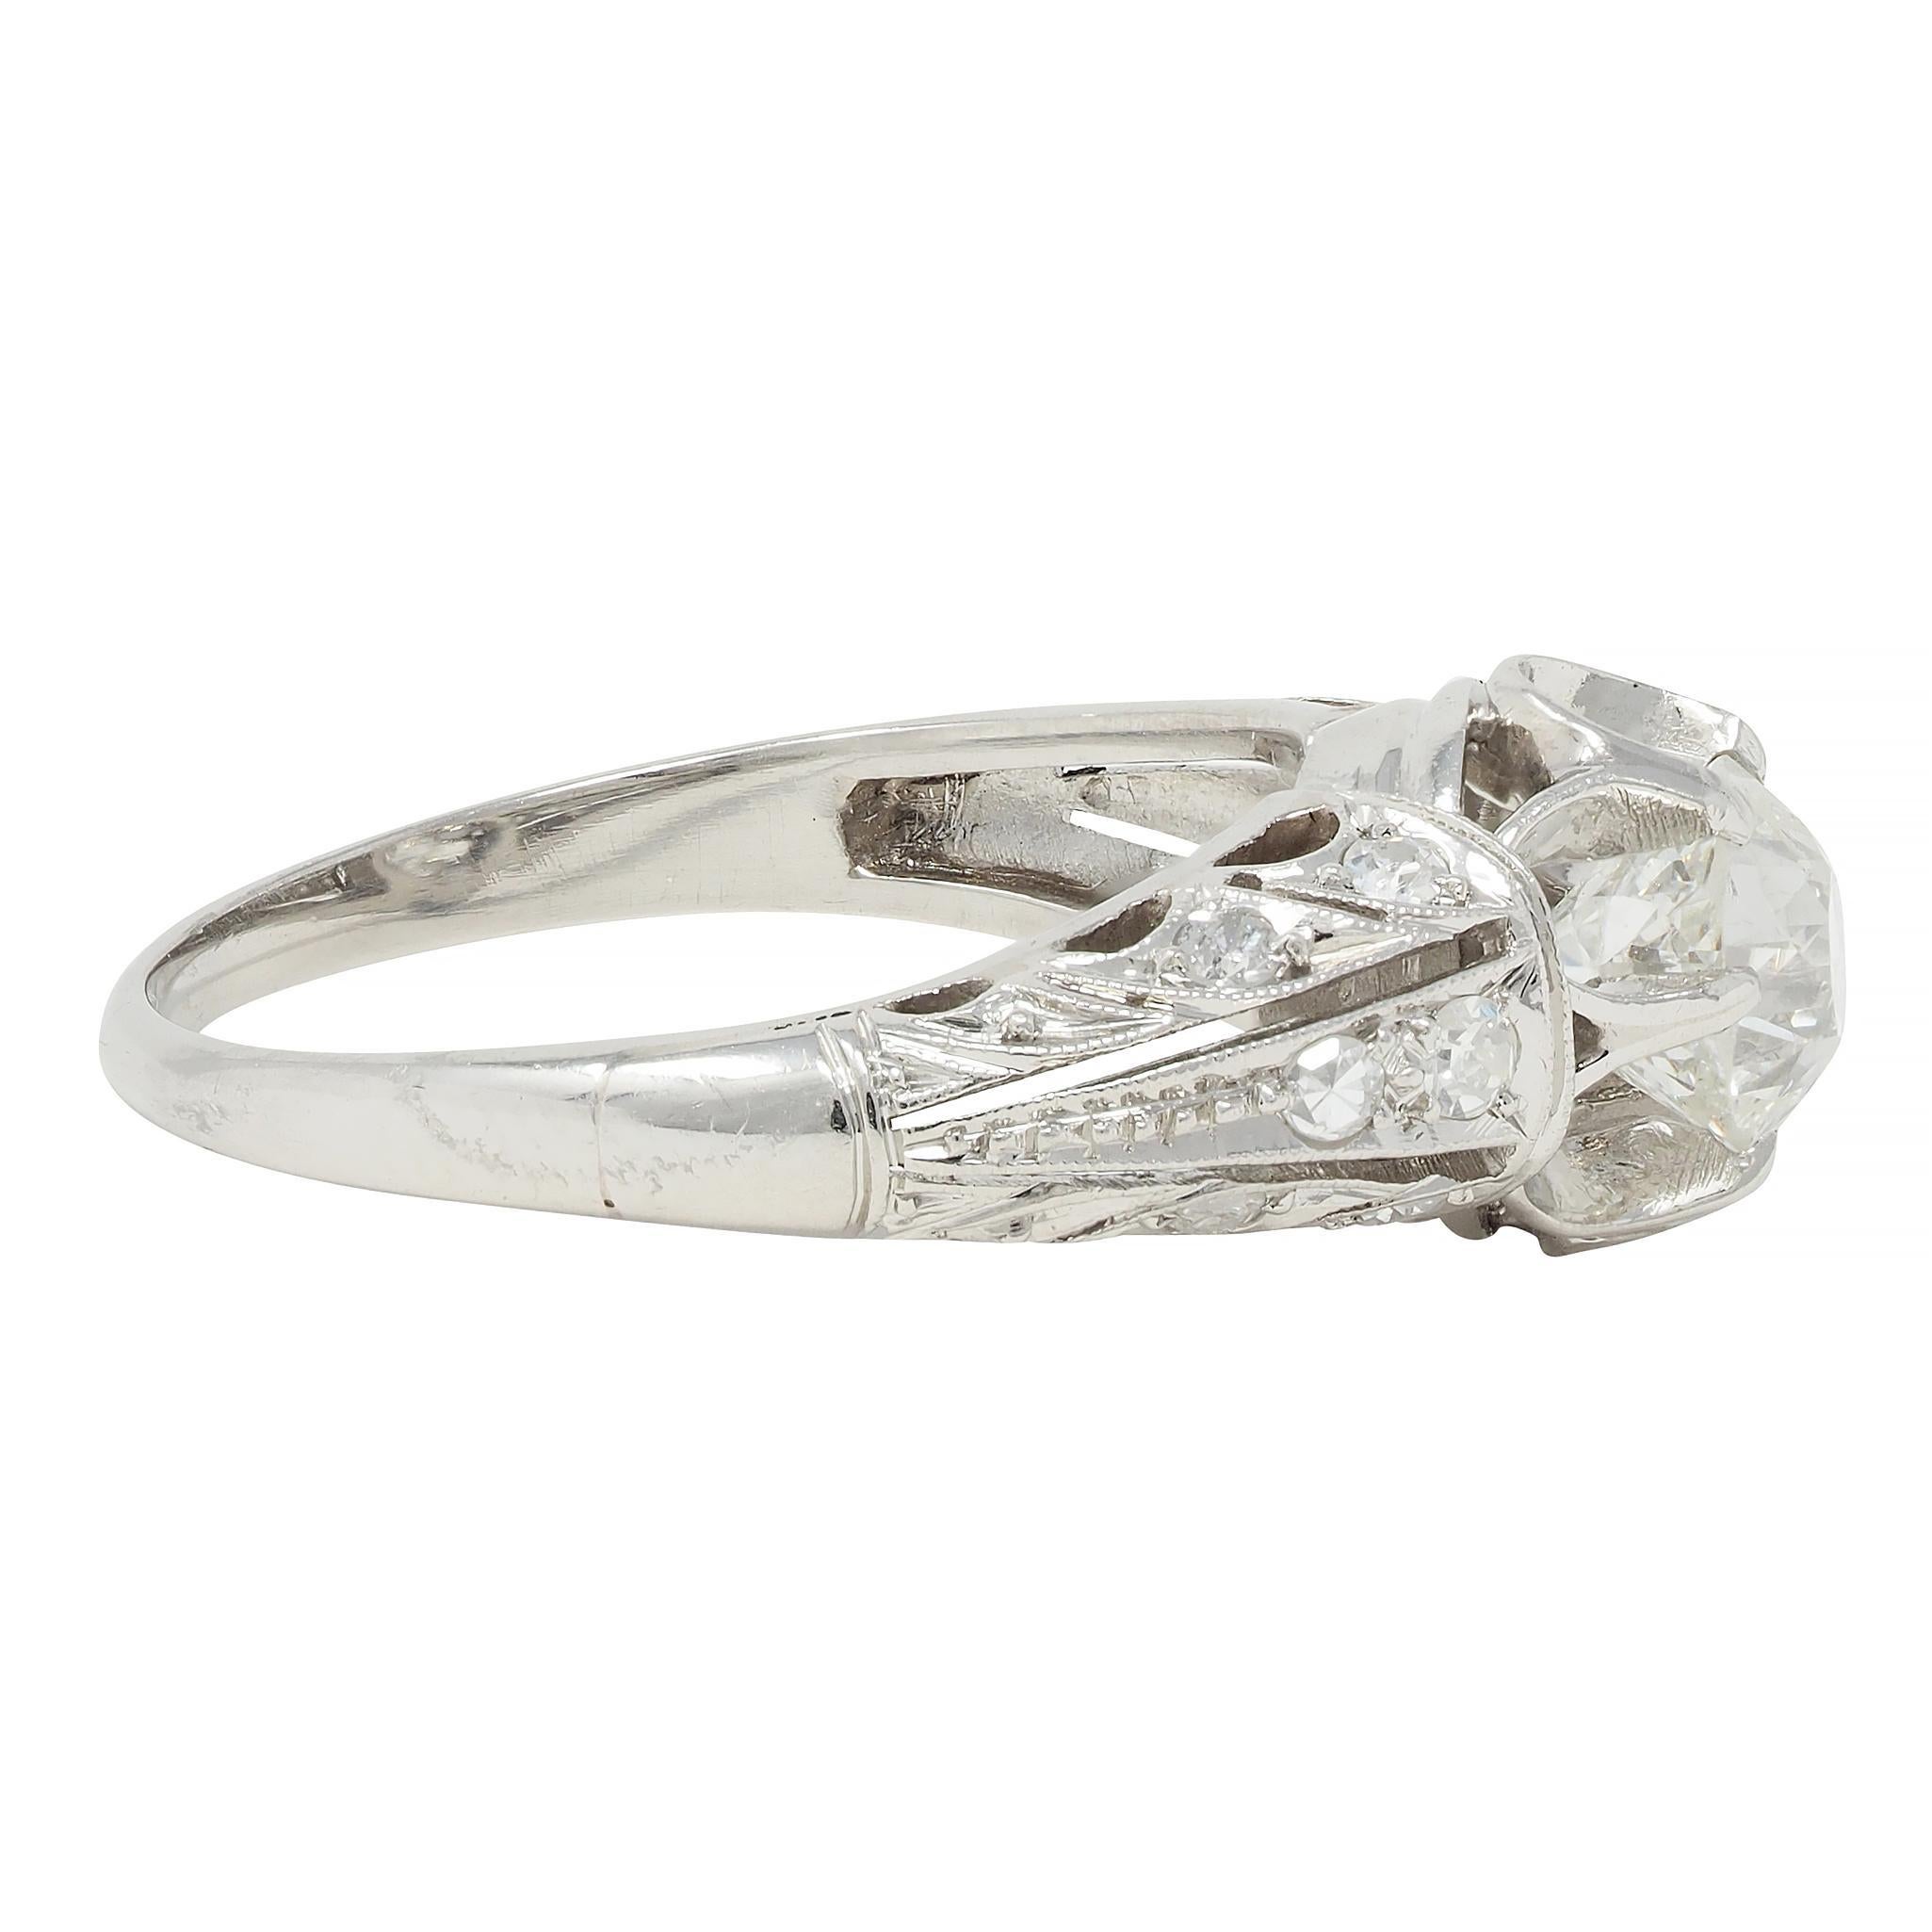 Edwardian 1.16 CTW Old Mine Cut Diamond Platinum Buttercup Engagement Ring In Excellent Condition For Sale In Philadelphia, PA